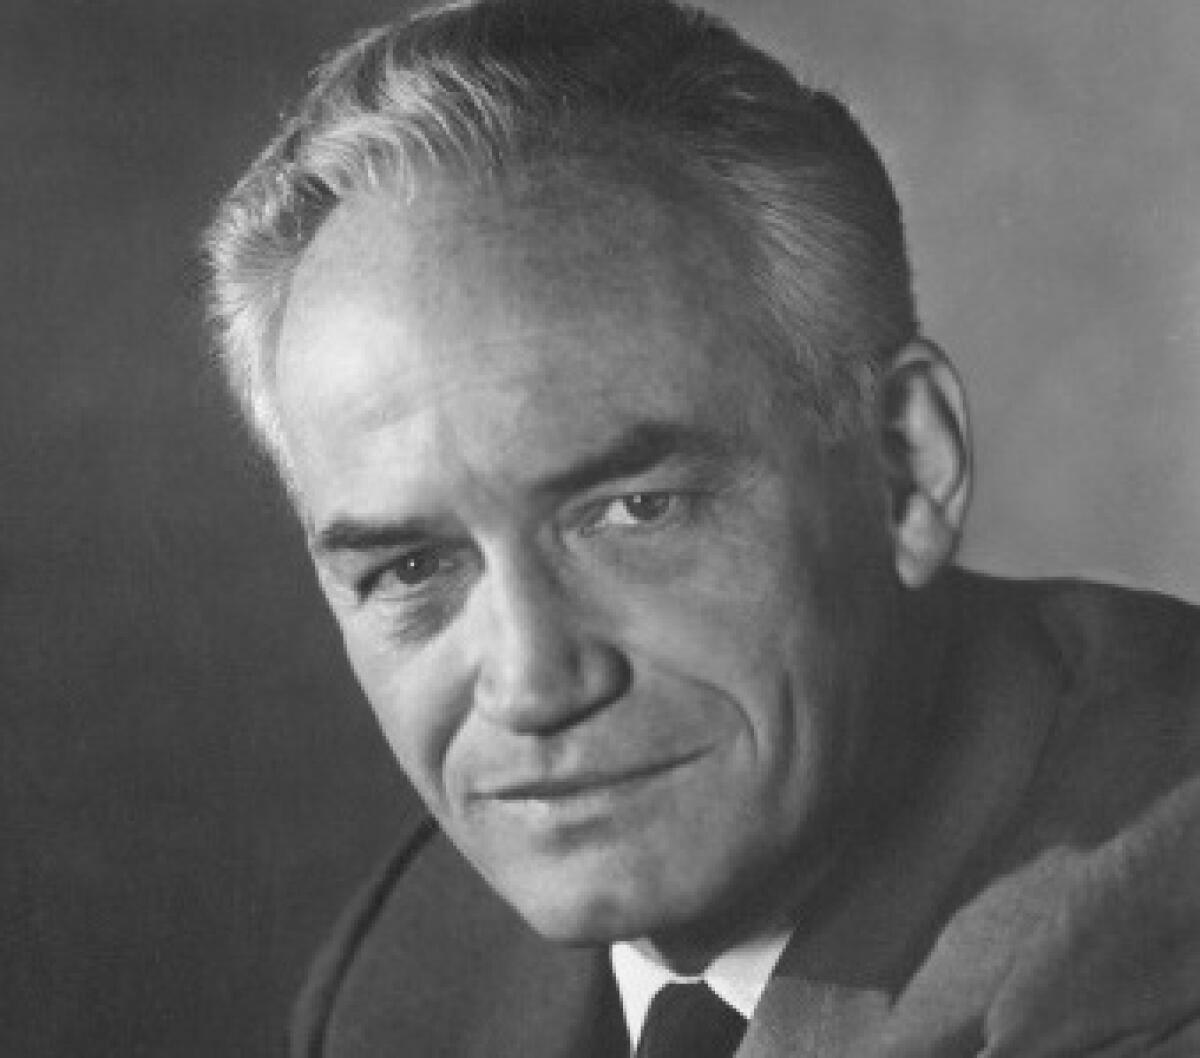 U.S. Senator Barry Goldwater summered with his family in La Jolla from 1940 to 1960.